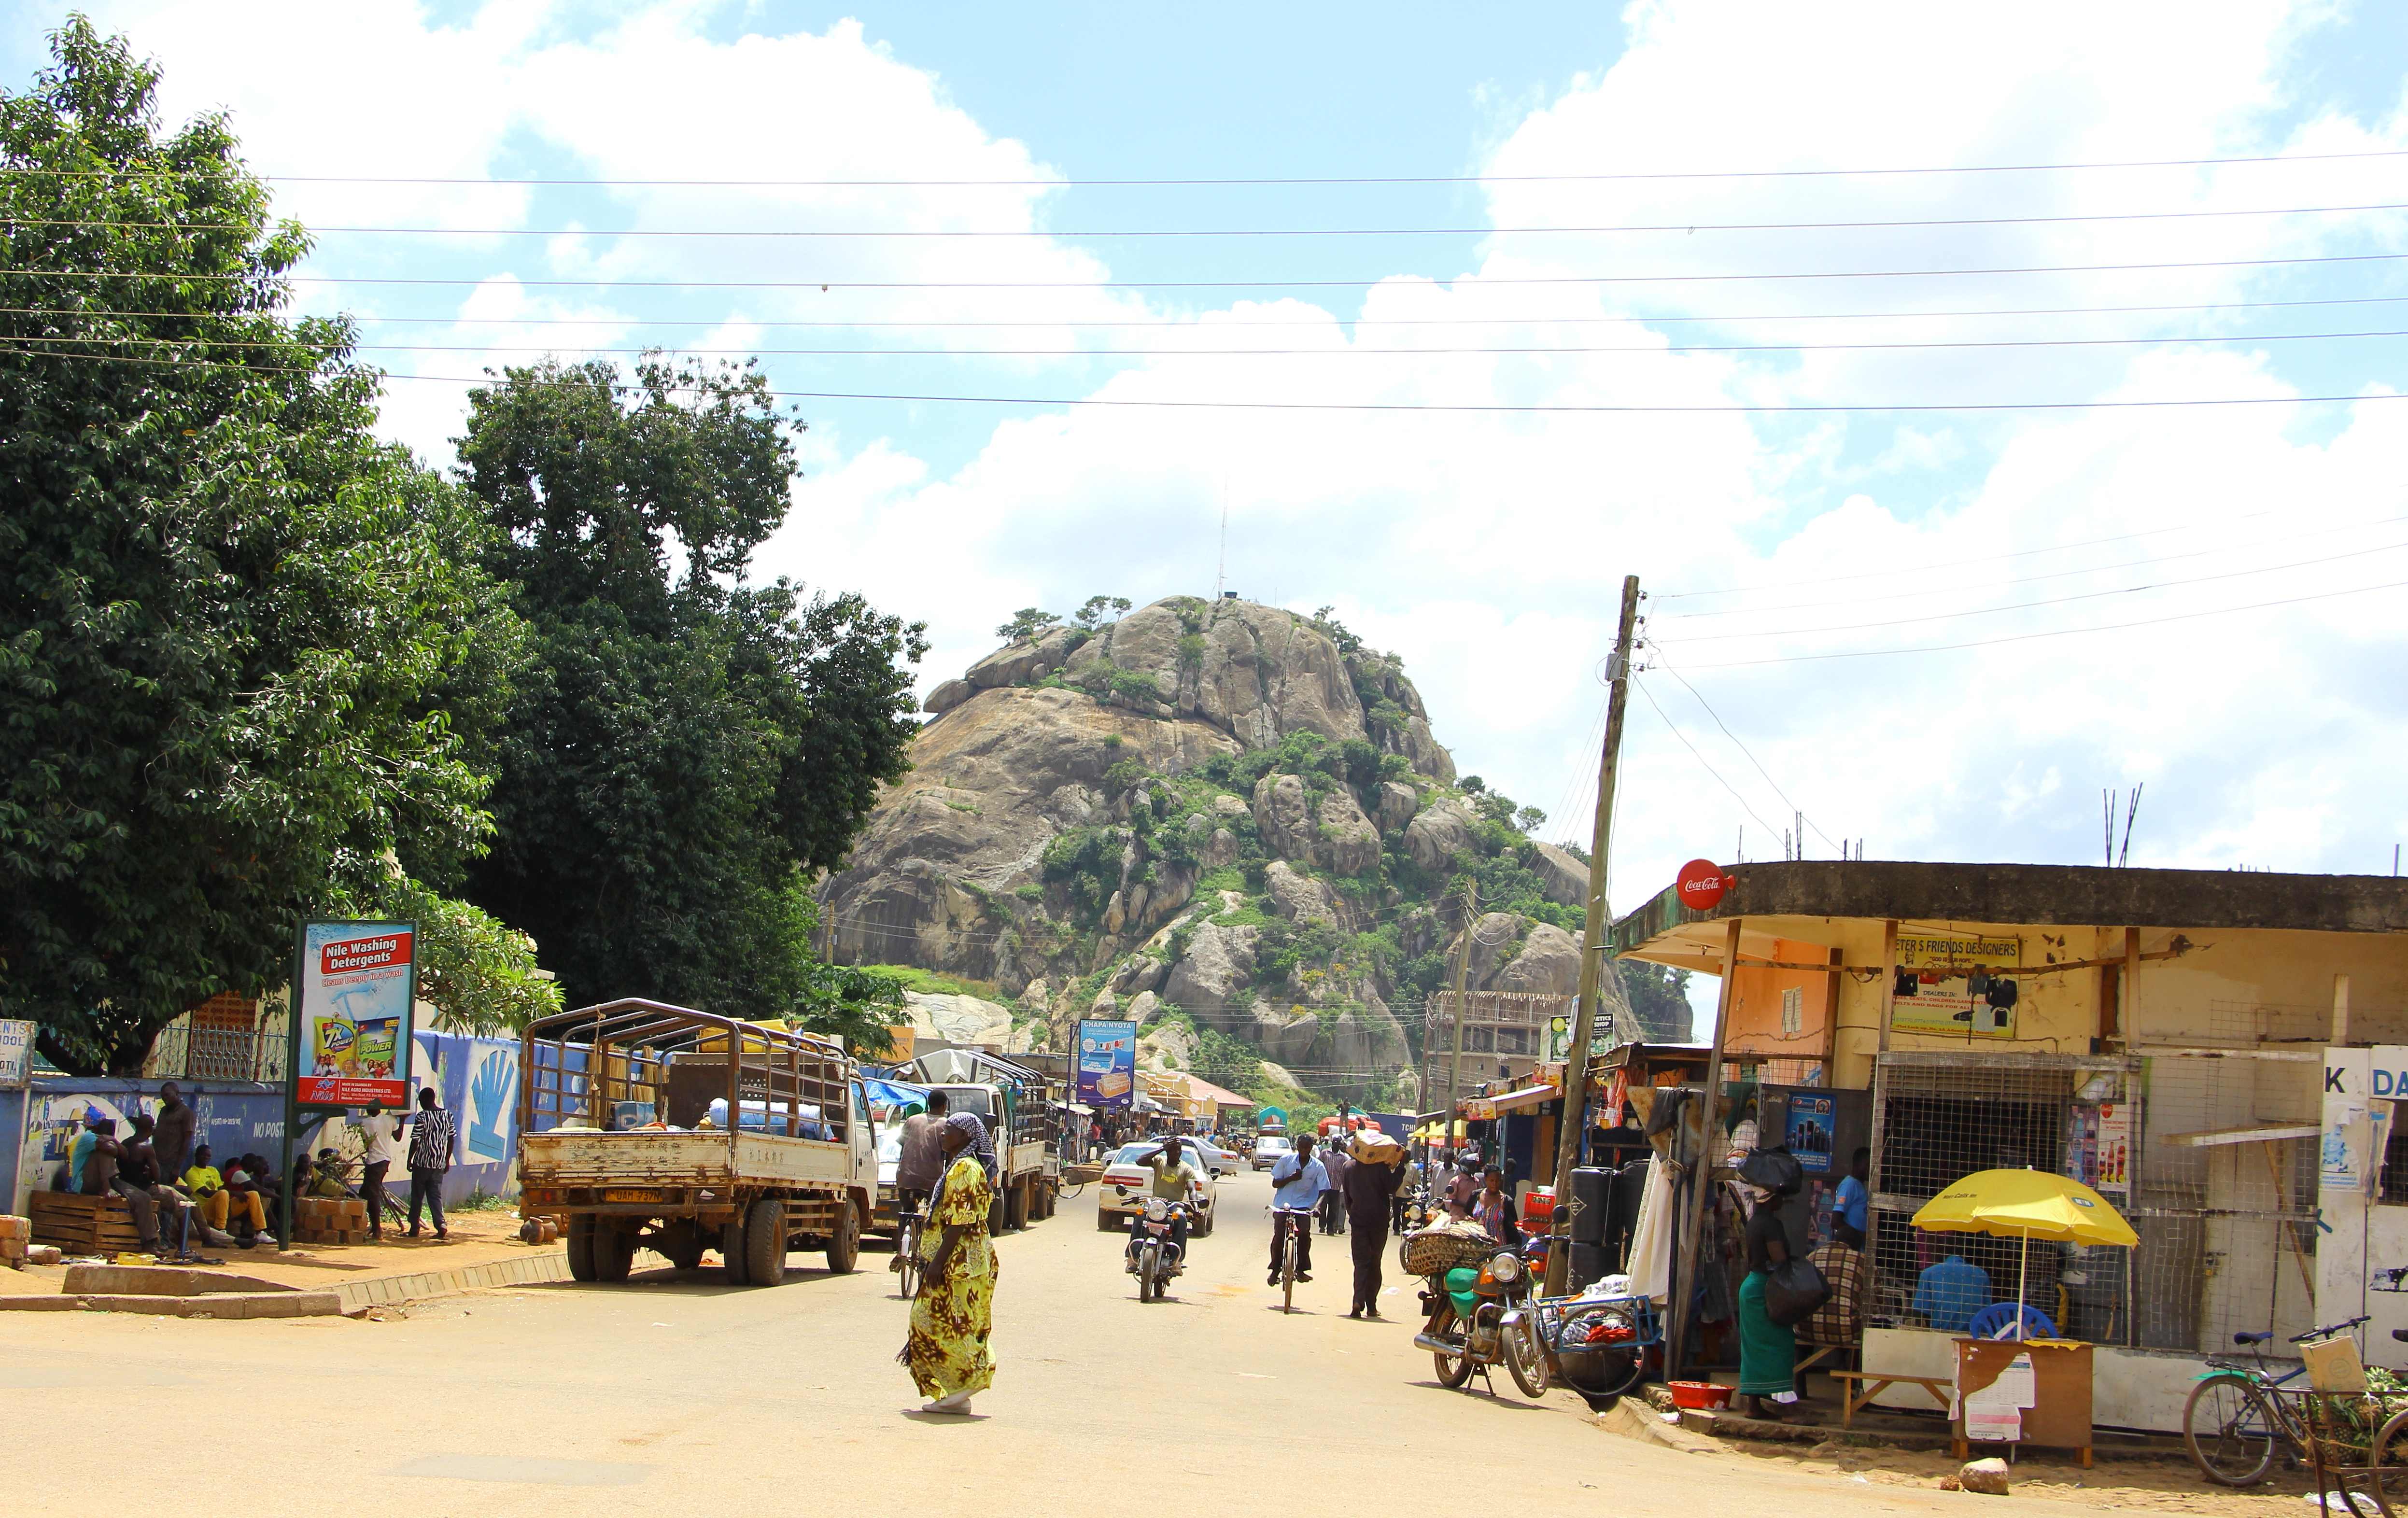 A view of Soroti Rock from a main street in town